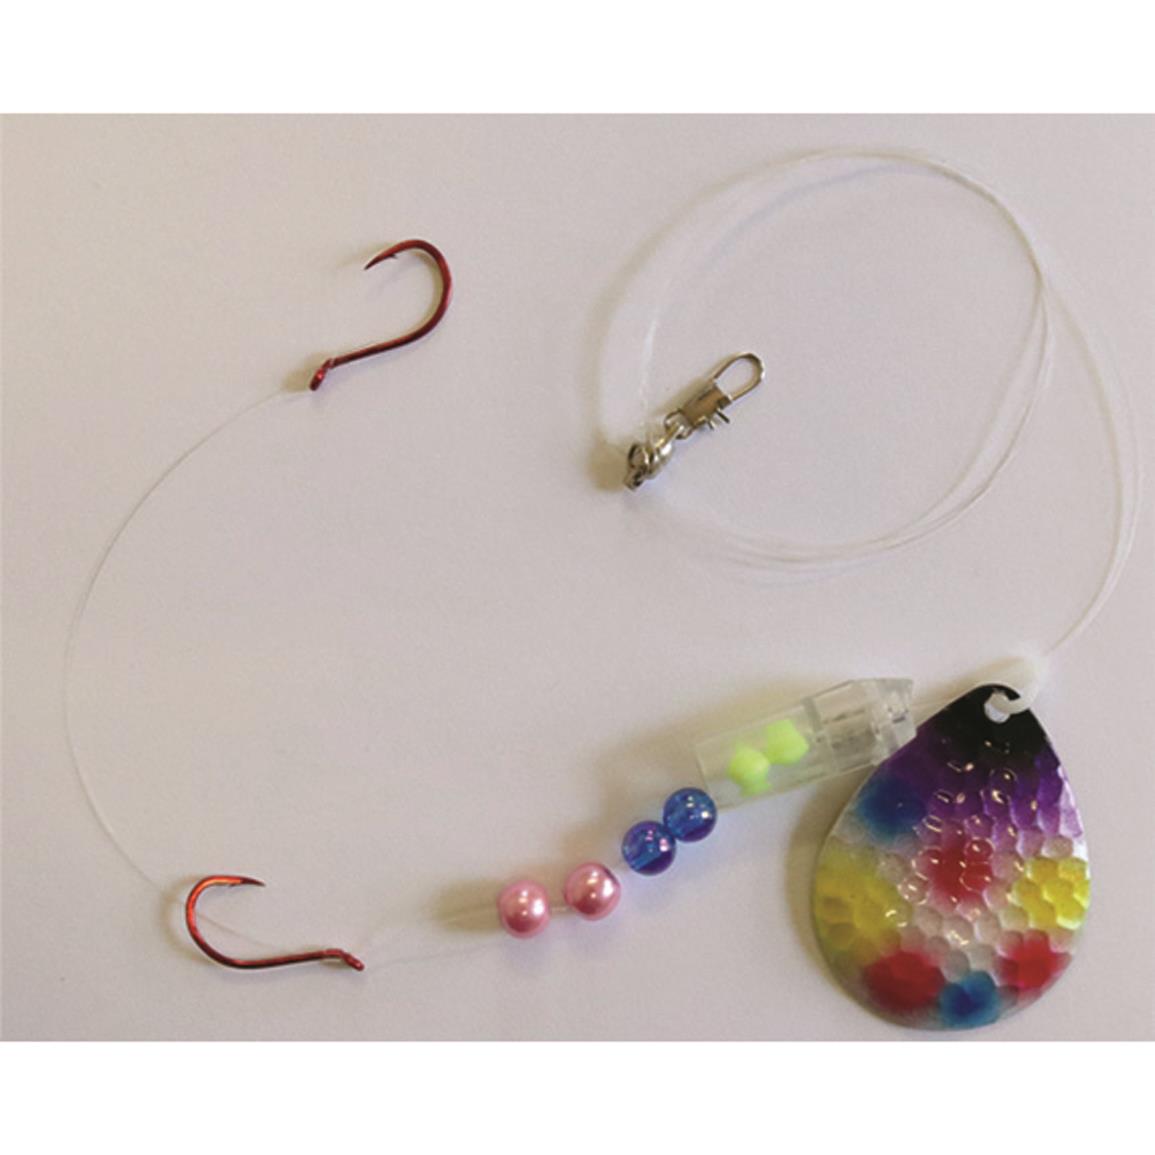 ACME Rattlin' Walleye Spinner Rig - 735525, Spinner Rigs & Rigging  Components at Sportsman's Guide